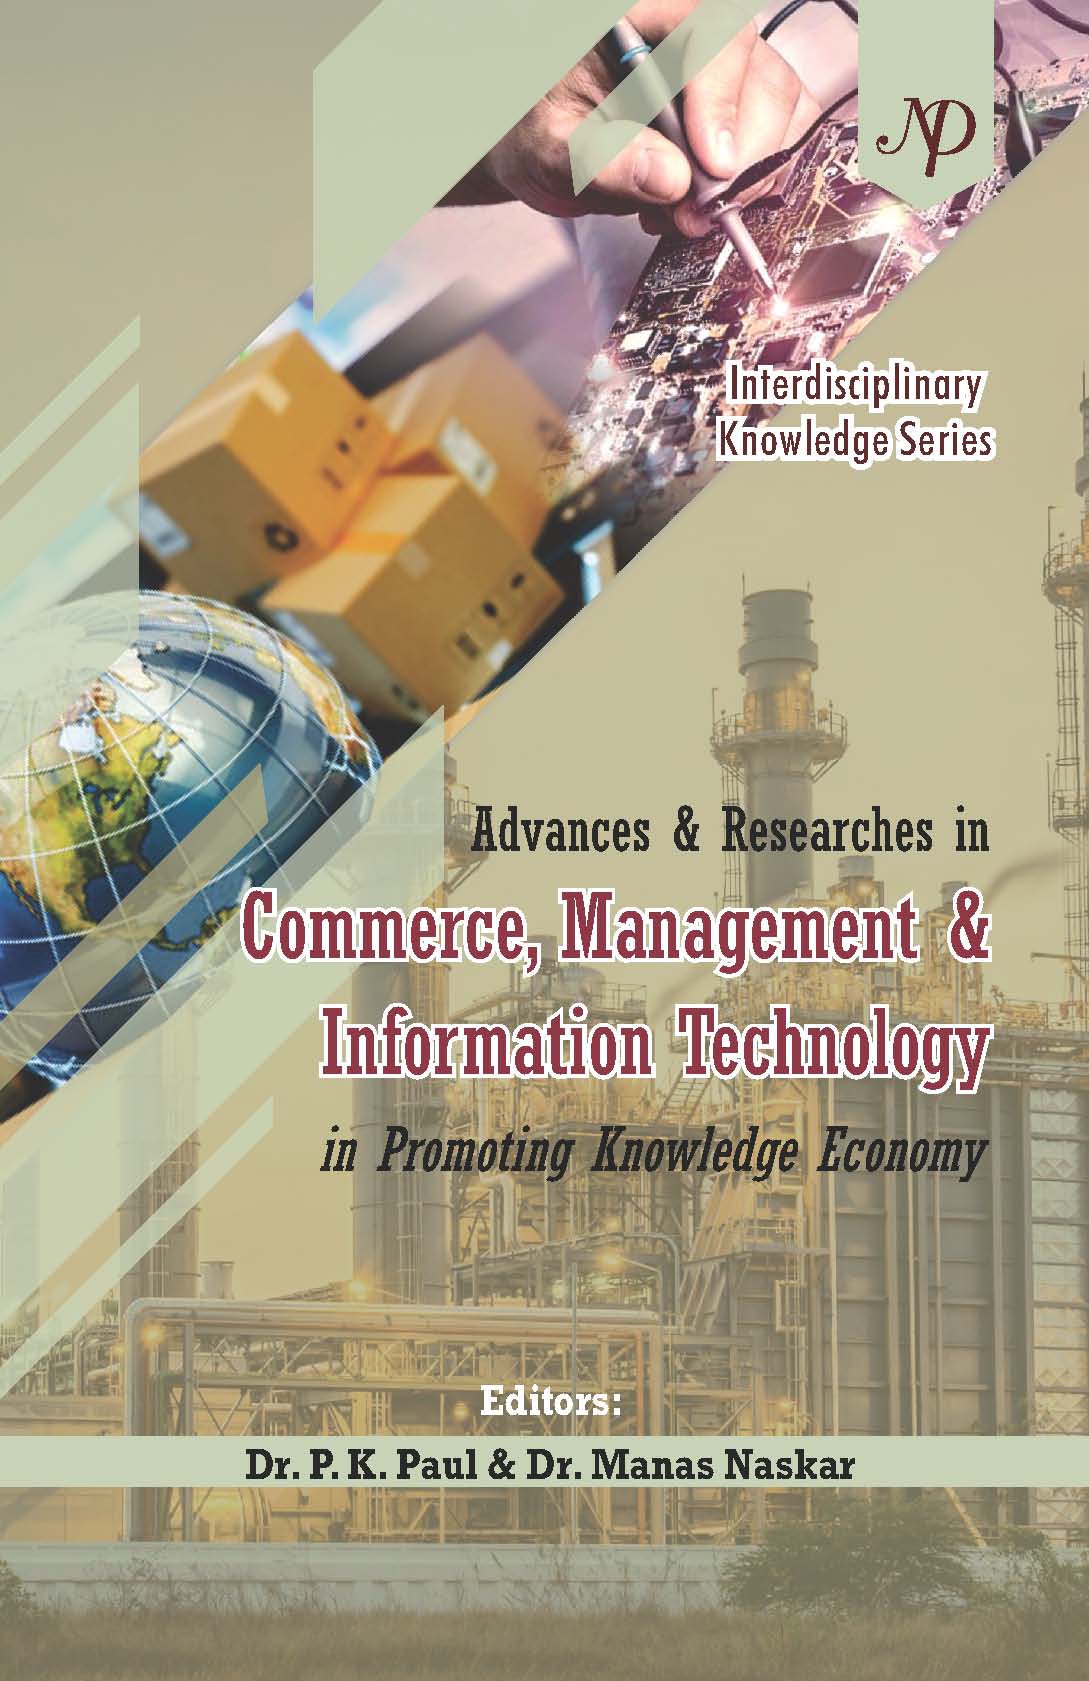 Advances and Researches in Commerce, Management.jpg